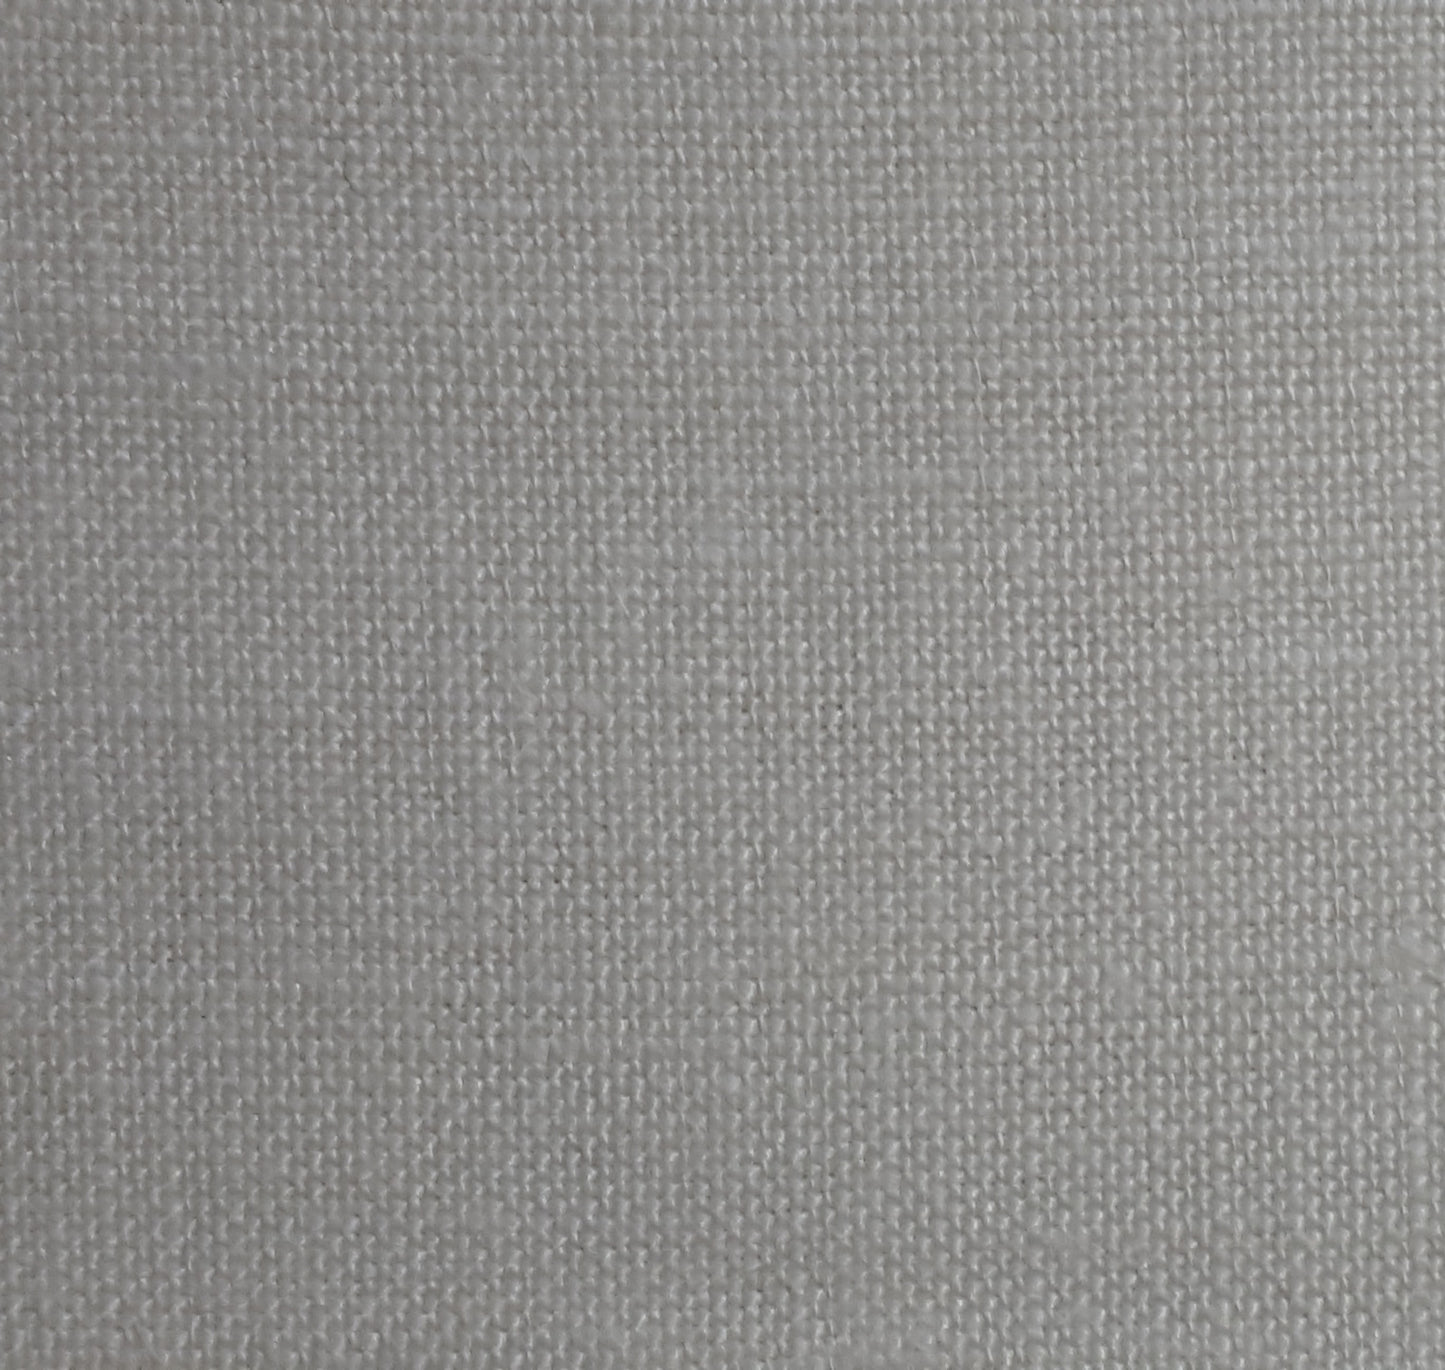 Embroidery Linen - White - $0.027/sq in